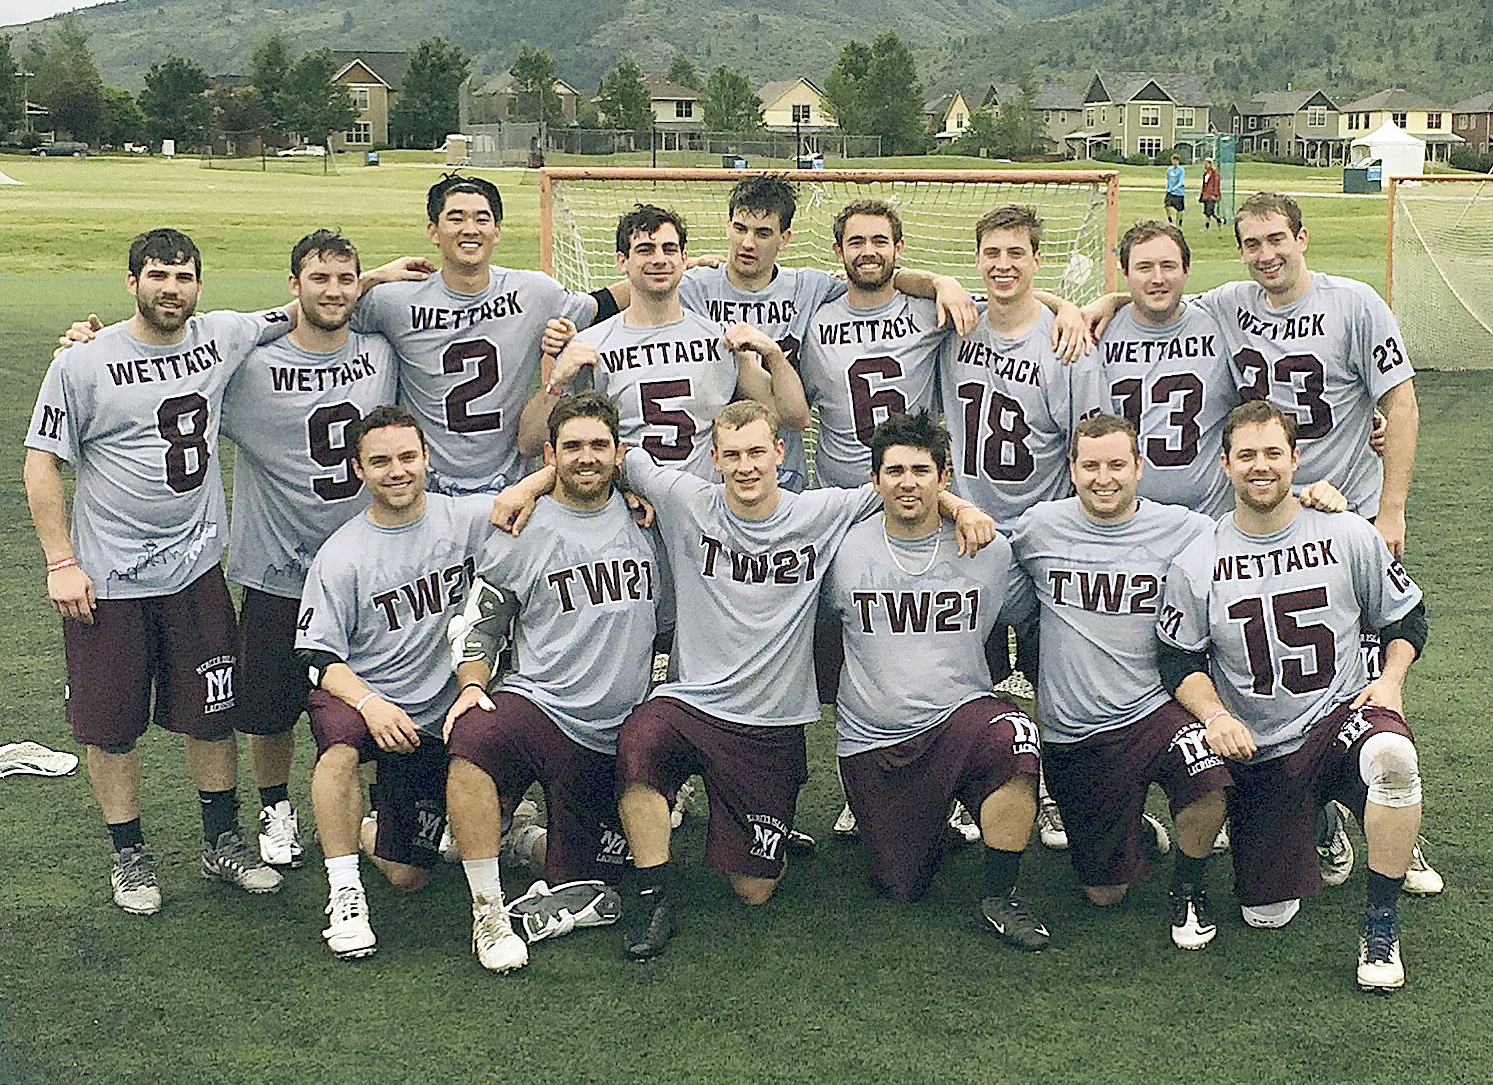 A team of Mercer Island lacrosse alumni took part in the Vail Lacrosse Tournament over the Fourth of July weekend (photo courtesy of Gregory Mahony).